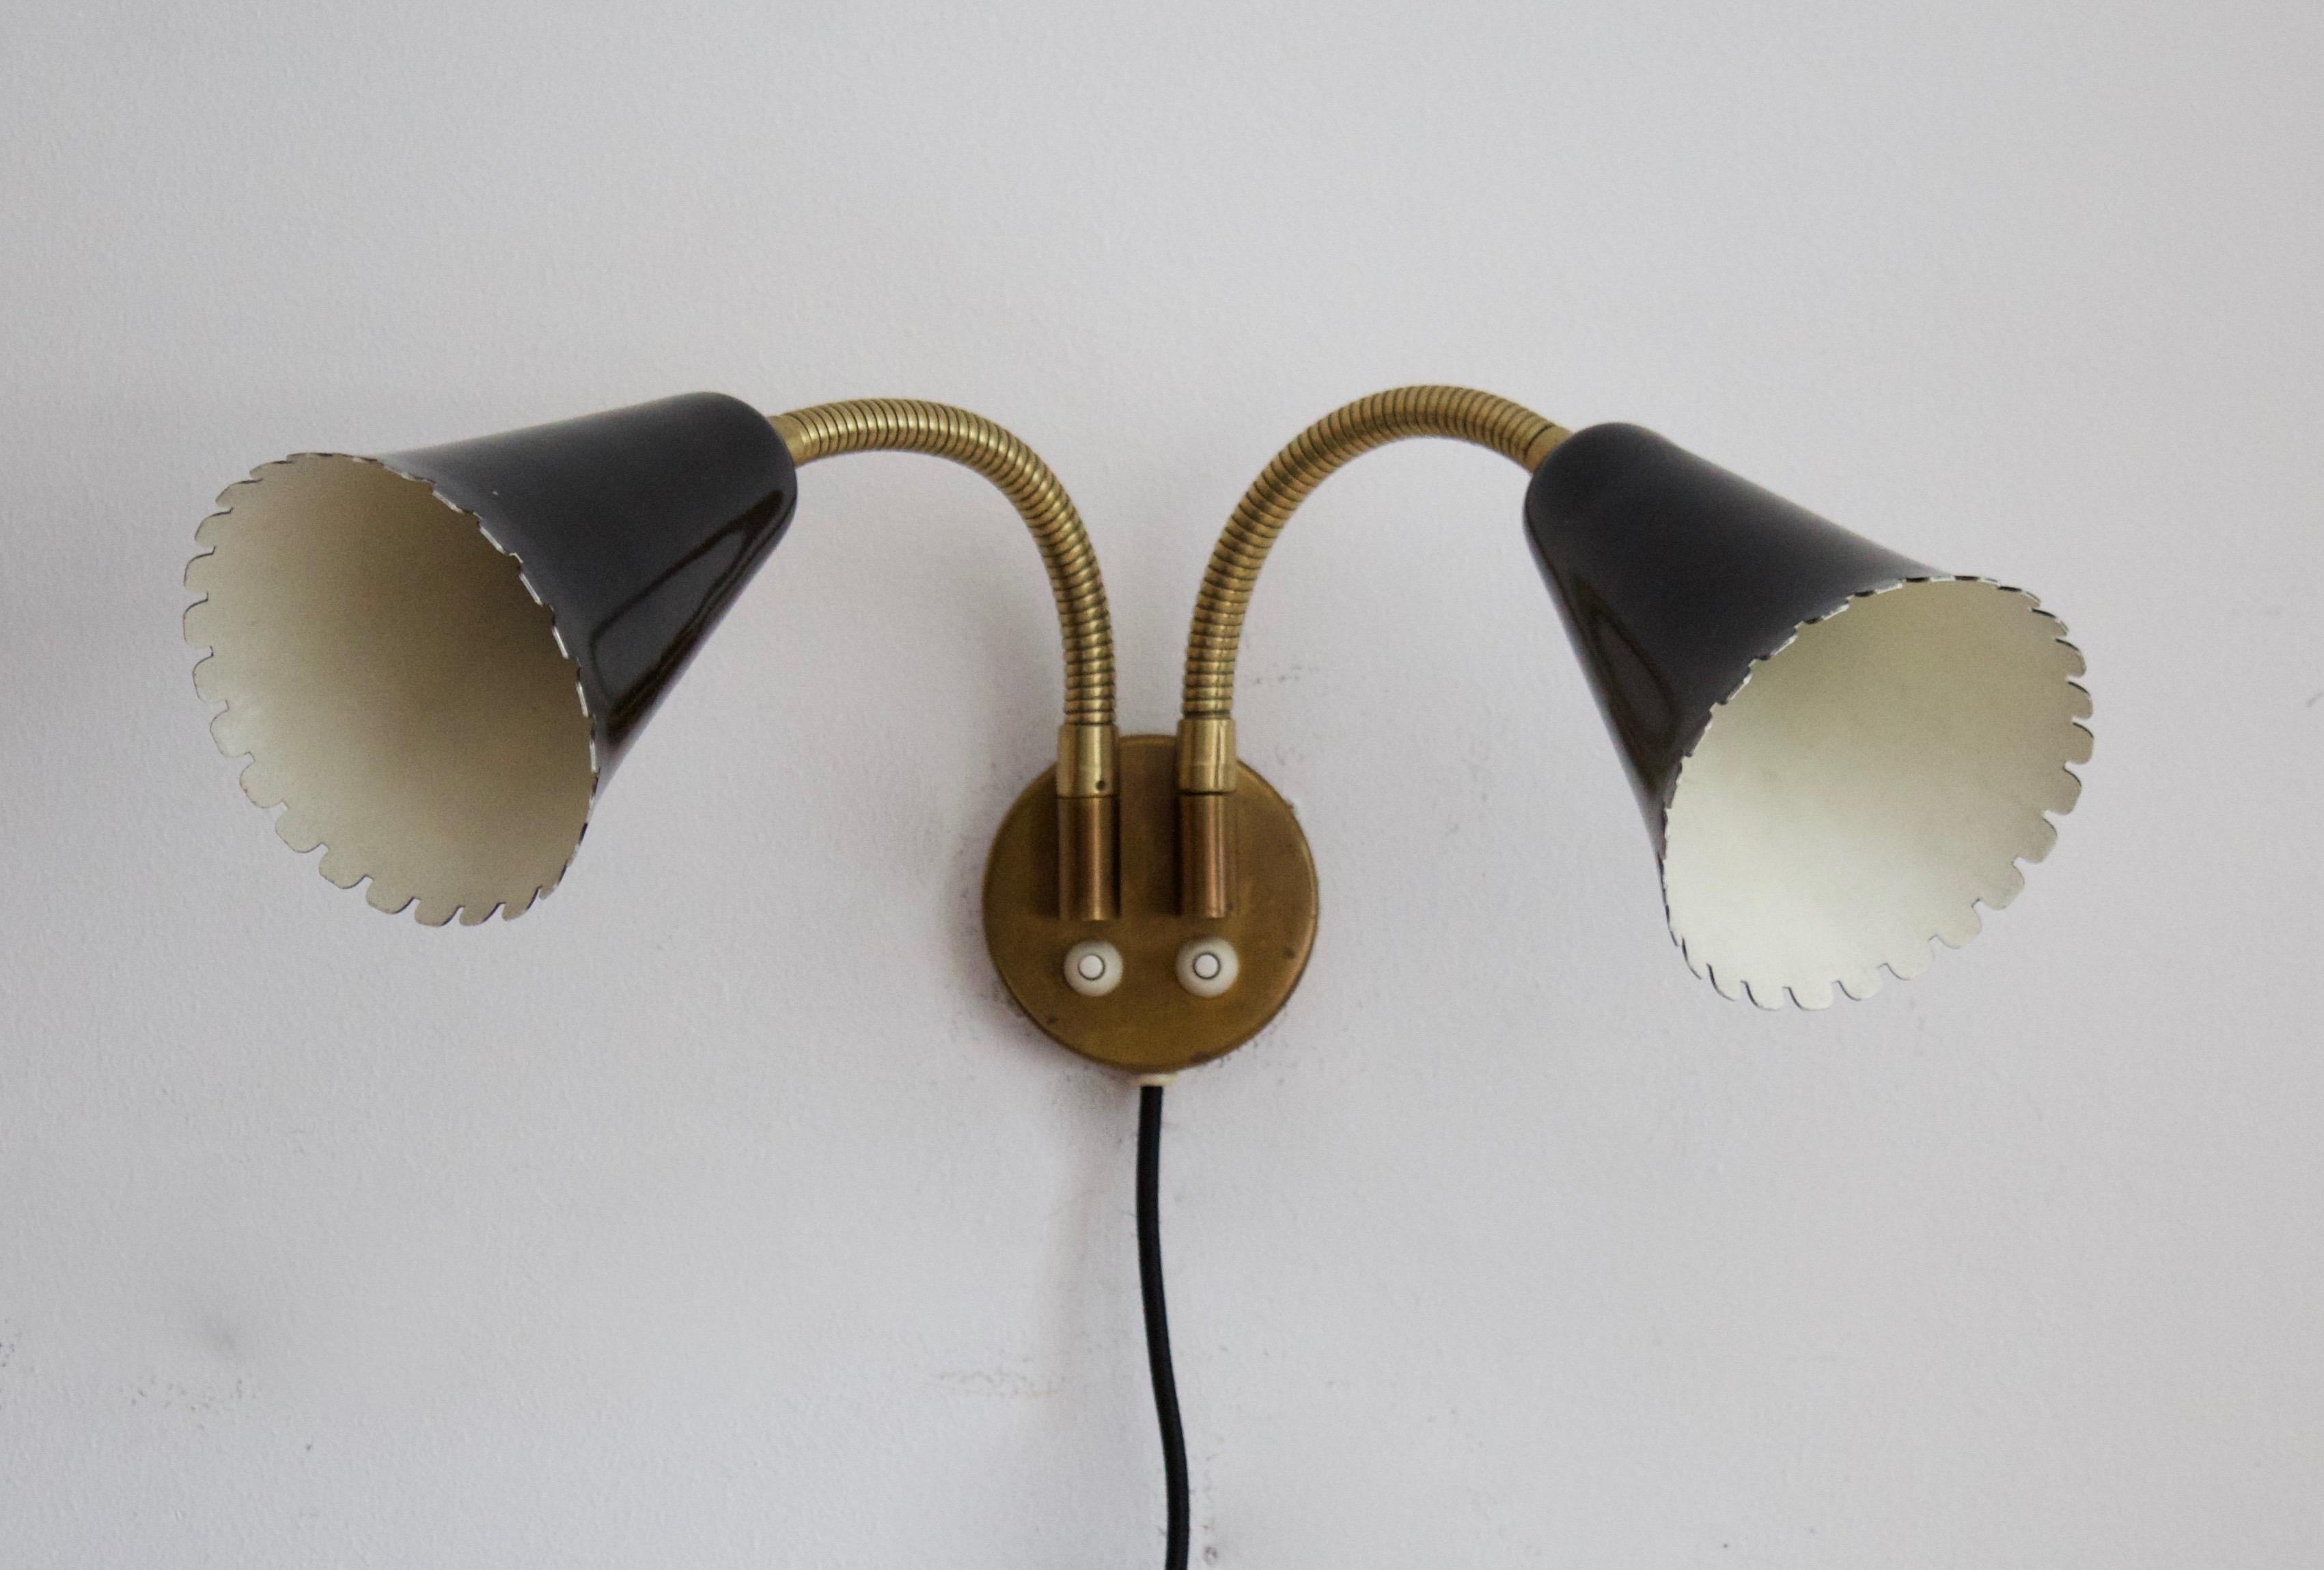 An adjustable organic wall light / sconce. Designed and produced by Böhlmarks, Sweden, 1950s. In brass and black-lacquered metal. Markings indicate patented design. 

Other designers of the period include Jean Royere, Paolo Buffa, Gino Sarfatti,